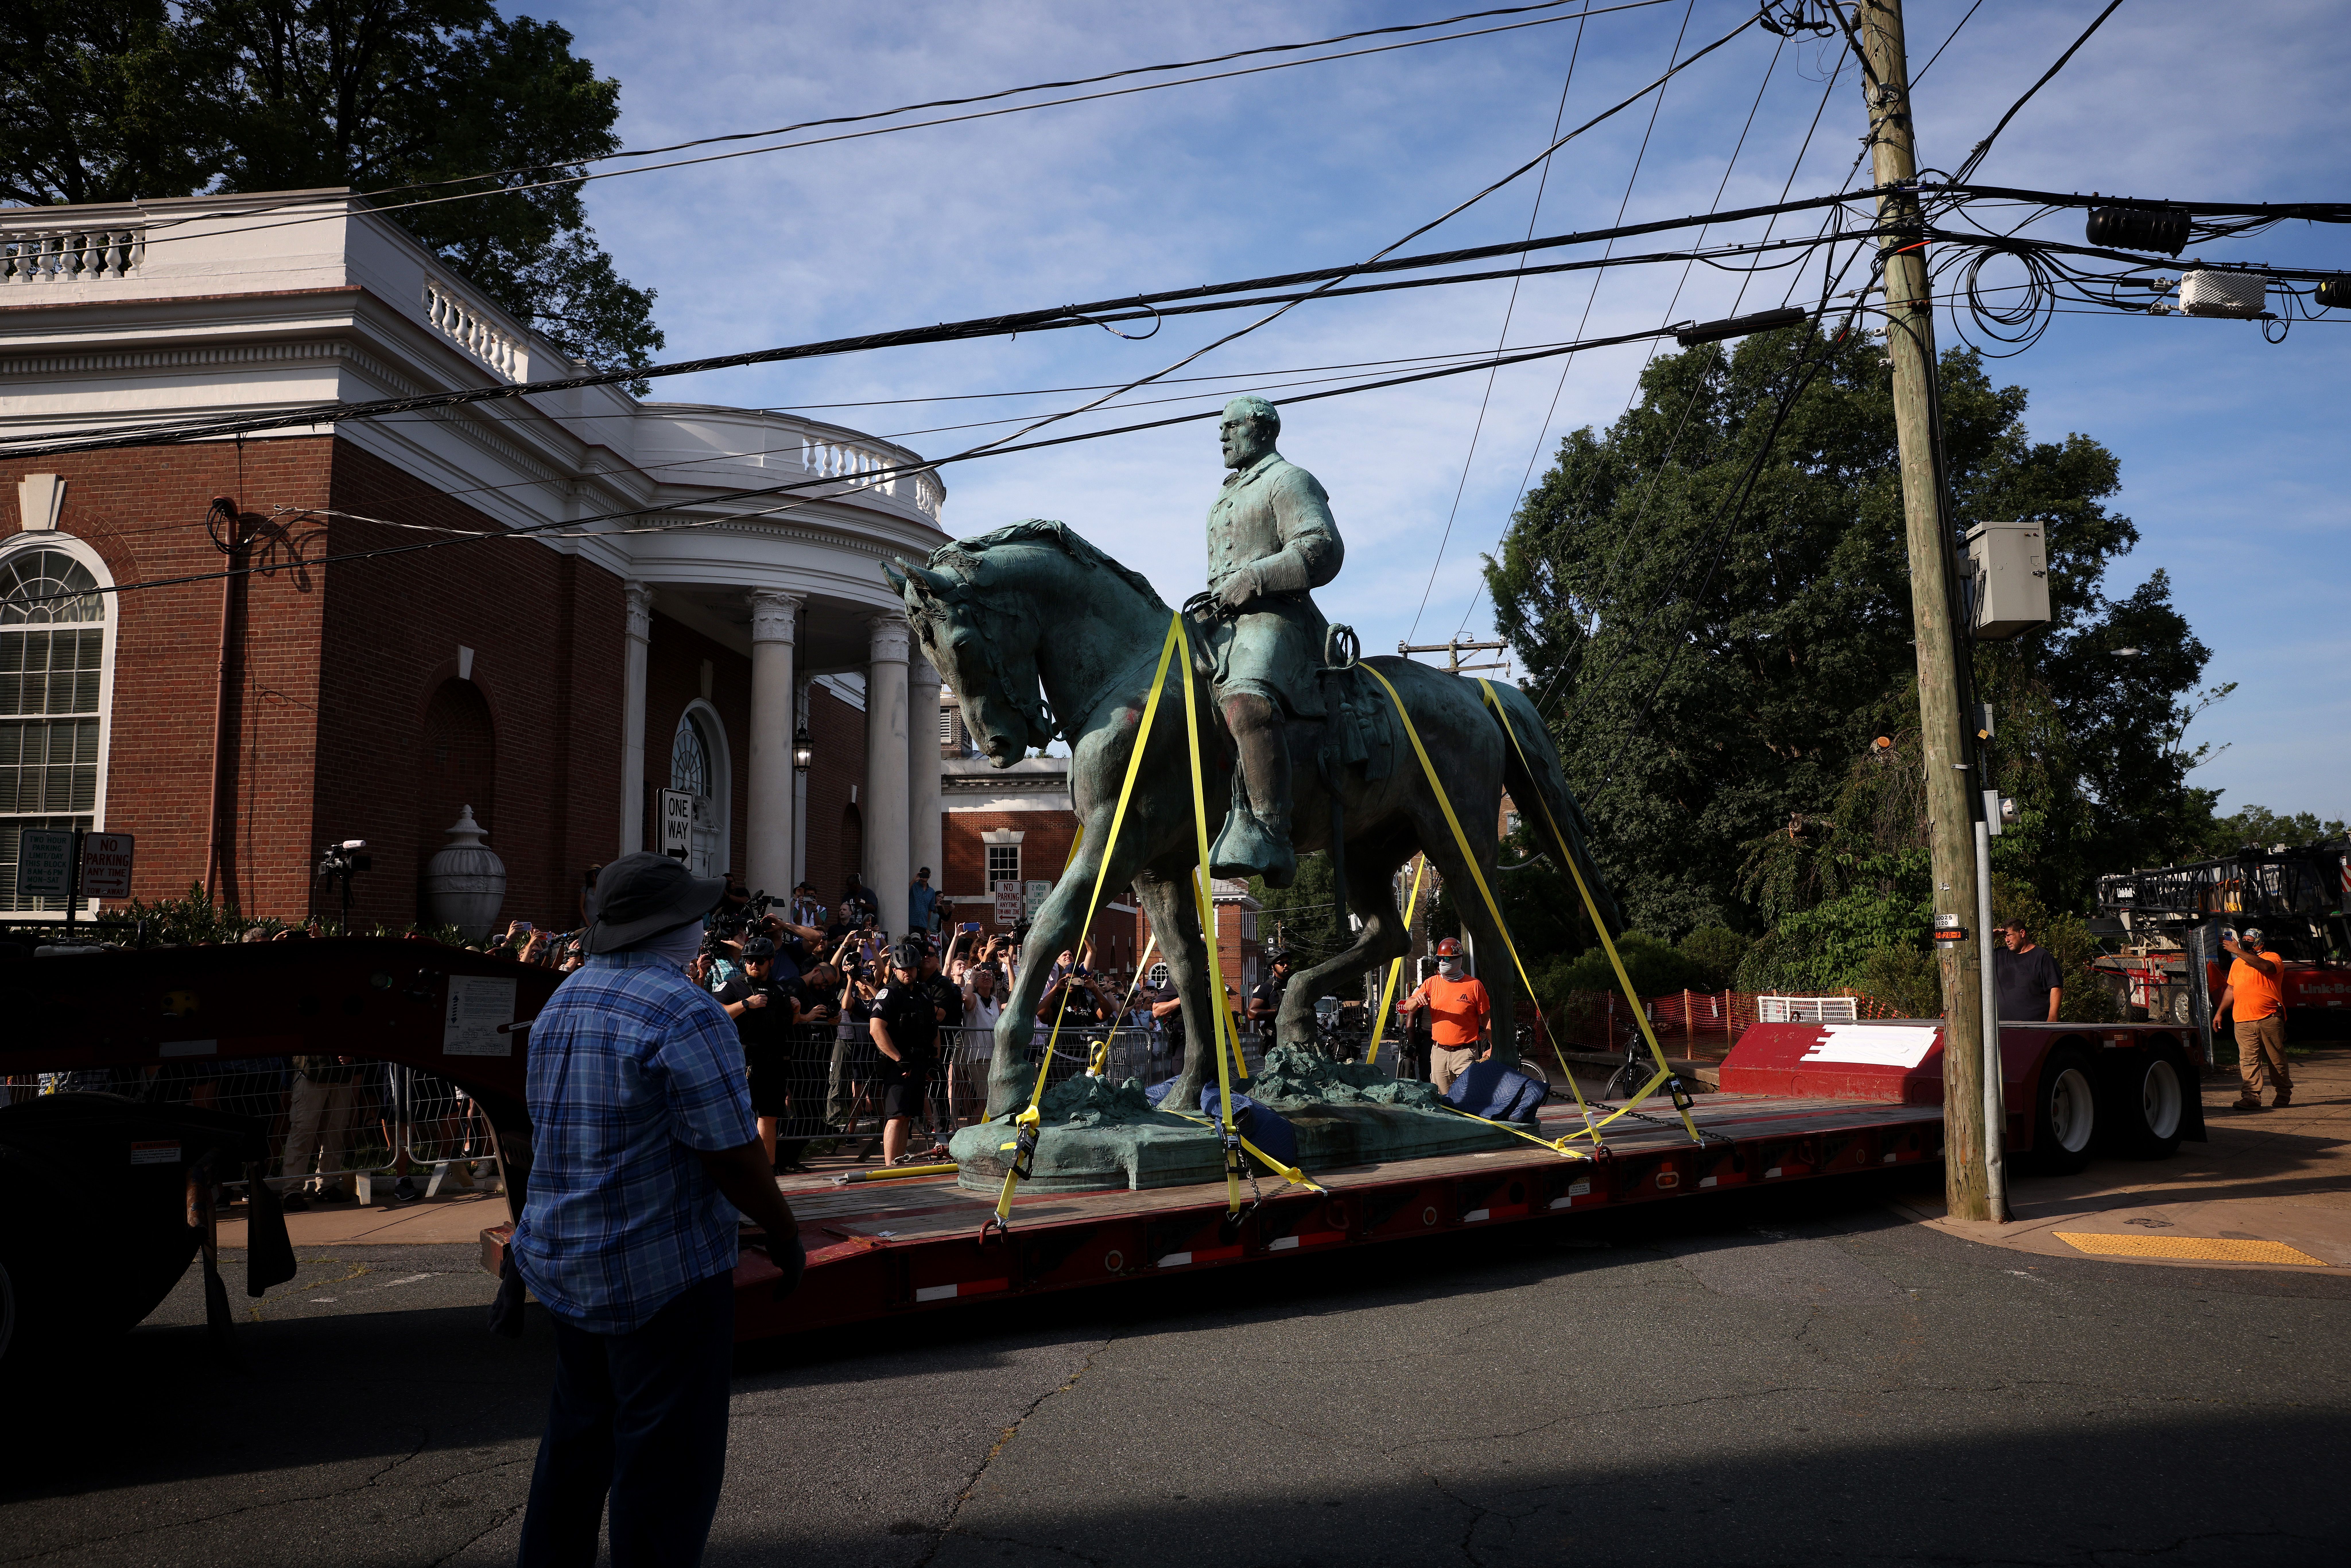 A flatbed truck carries a statue of Confederate General Robert E. Lee from the Market Street Park July 10